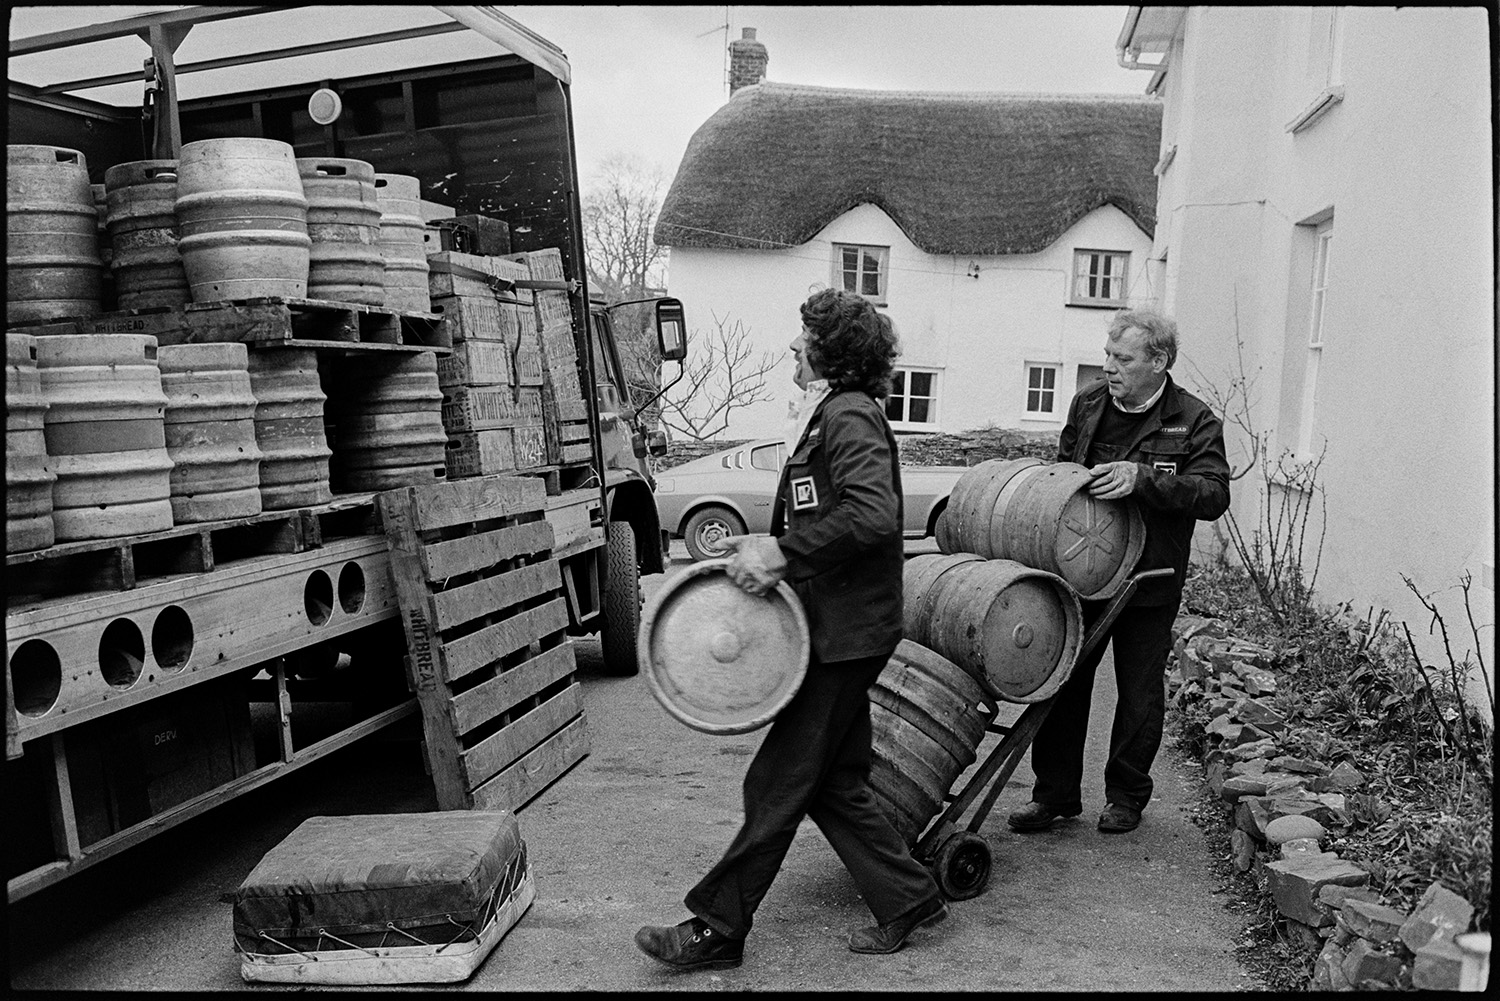 Men unloading barrels of beer from lorry outside pub. 
[Two men unloading barrels of beer from a lorry outside the Rams Head pub in Dolton. A thatched cottage with eyebrow eaves can be seen in the background.]